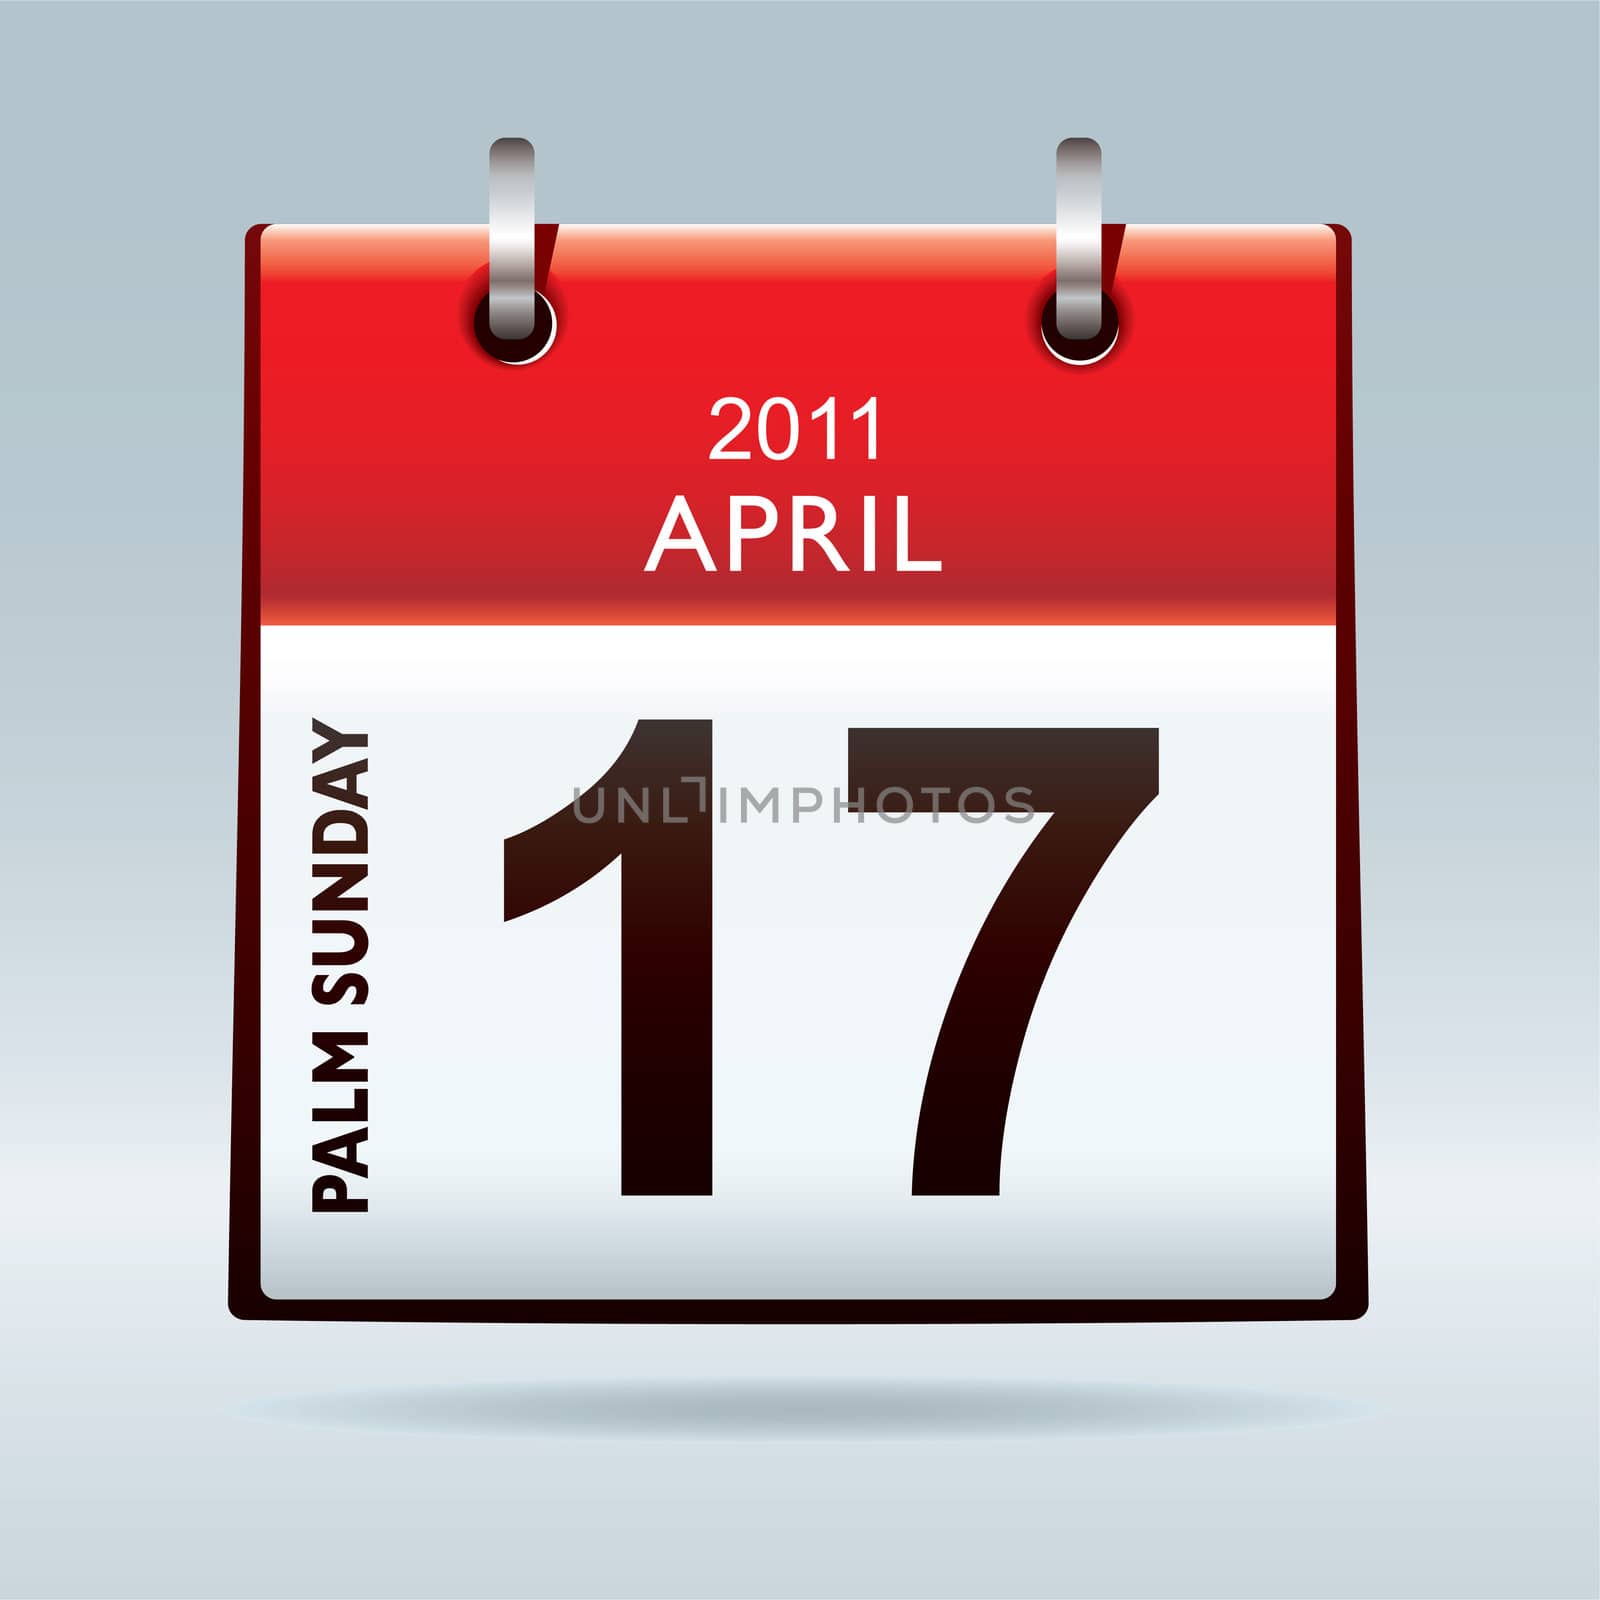 Palm sunday calendar 2011 icon or concept with red top